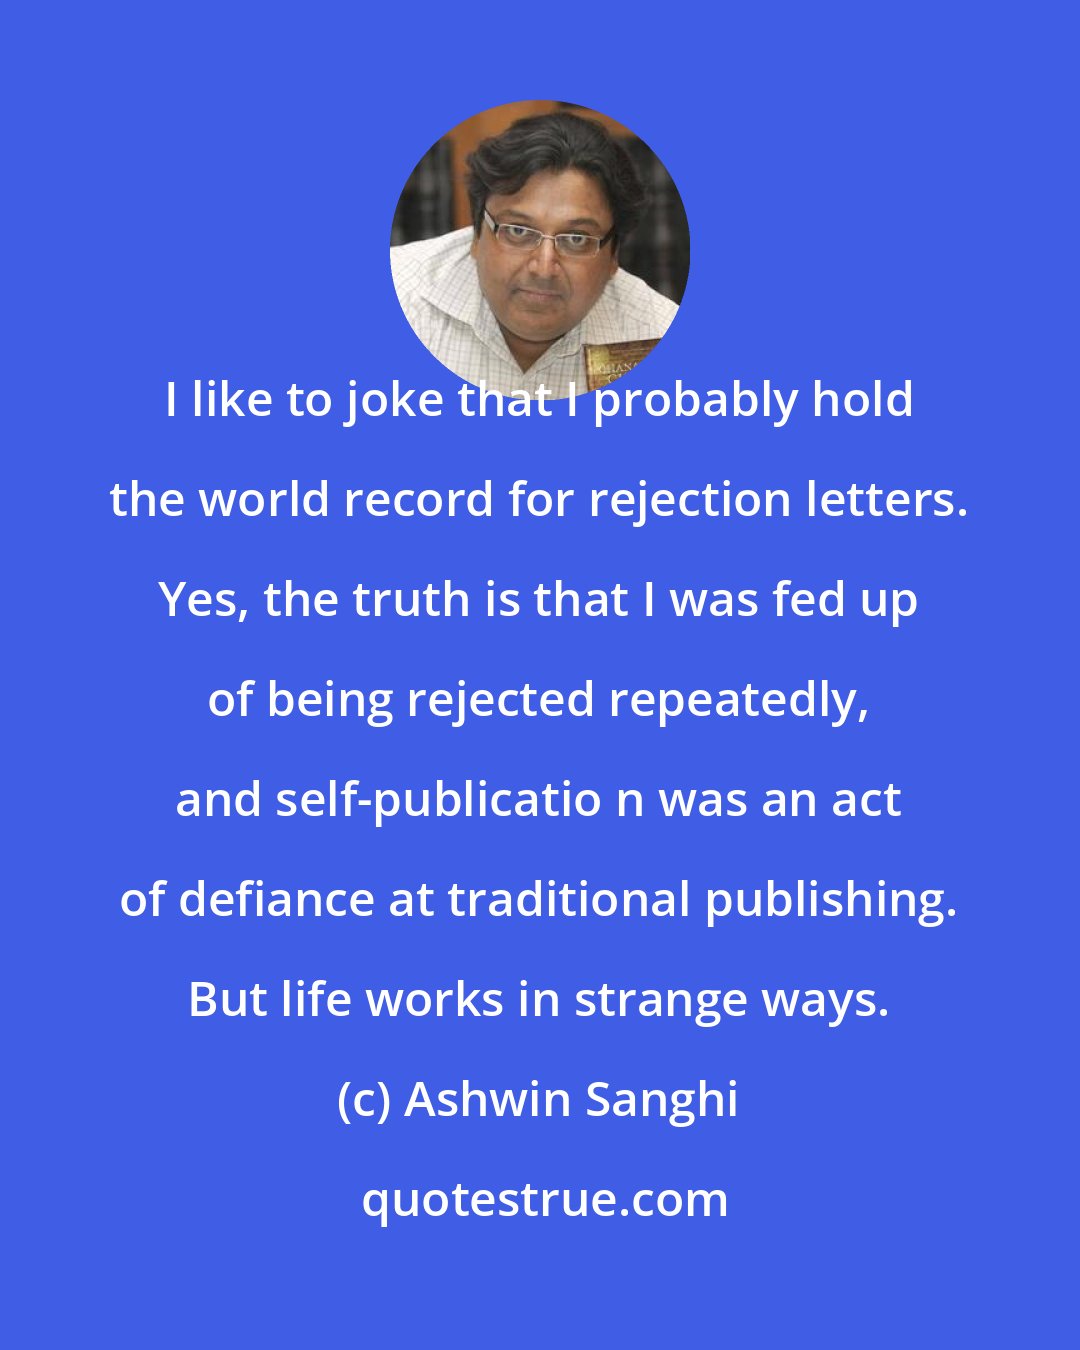 Ashwin Sanghi: I like to joke that I probably hold the world record for rejection letters. Yes, the truth is that I was fed up of being rejected repeatedly, and self-publicatio n was an act of defiance at traditional publishing. But life works in strange ways.